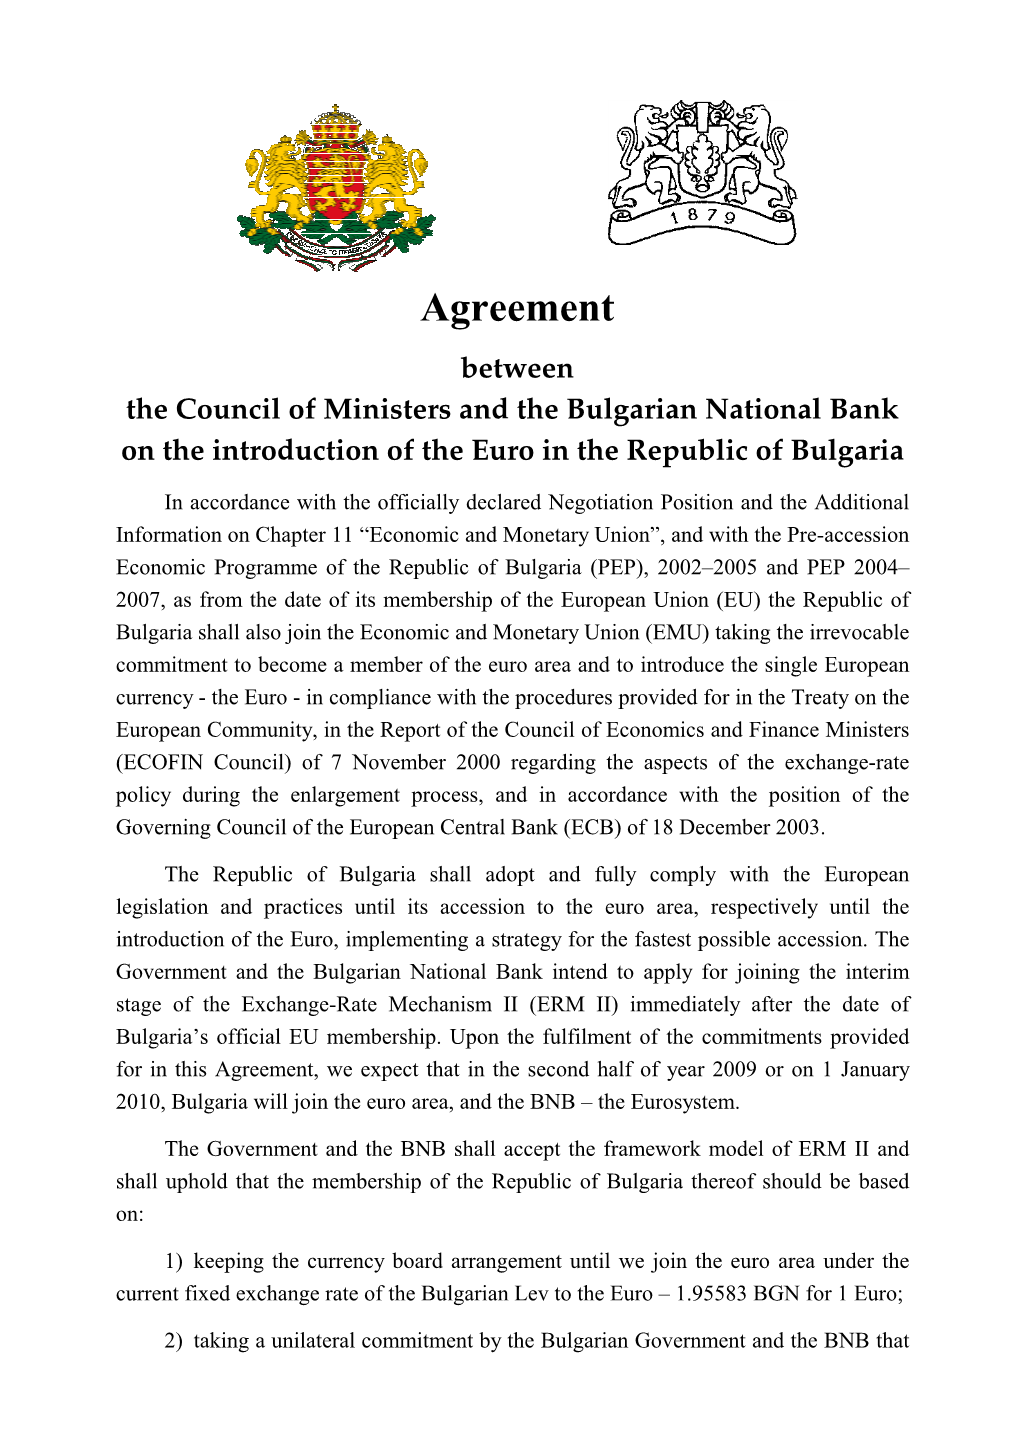 Agreement Between the Council of Ministers and the Bulgarian National Bank on the Introduction of the Euro in the Republic of Bulgaria